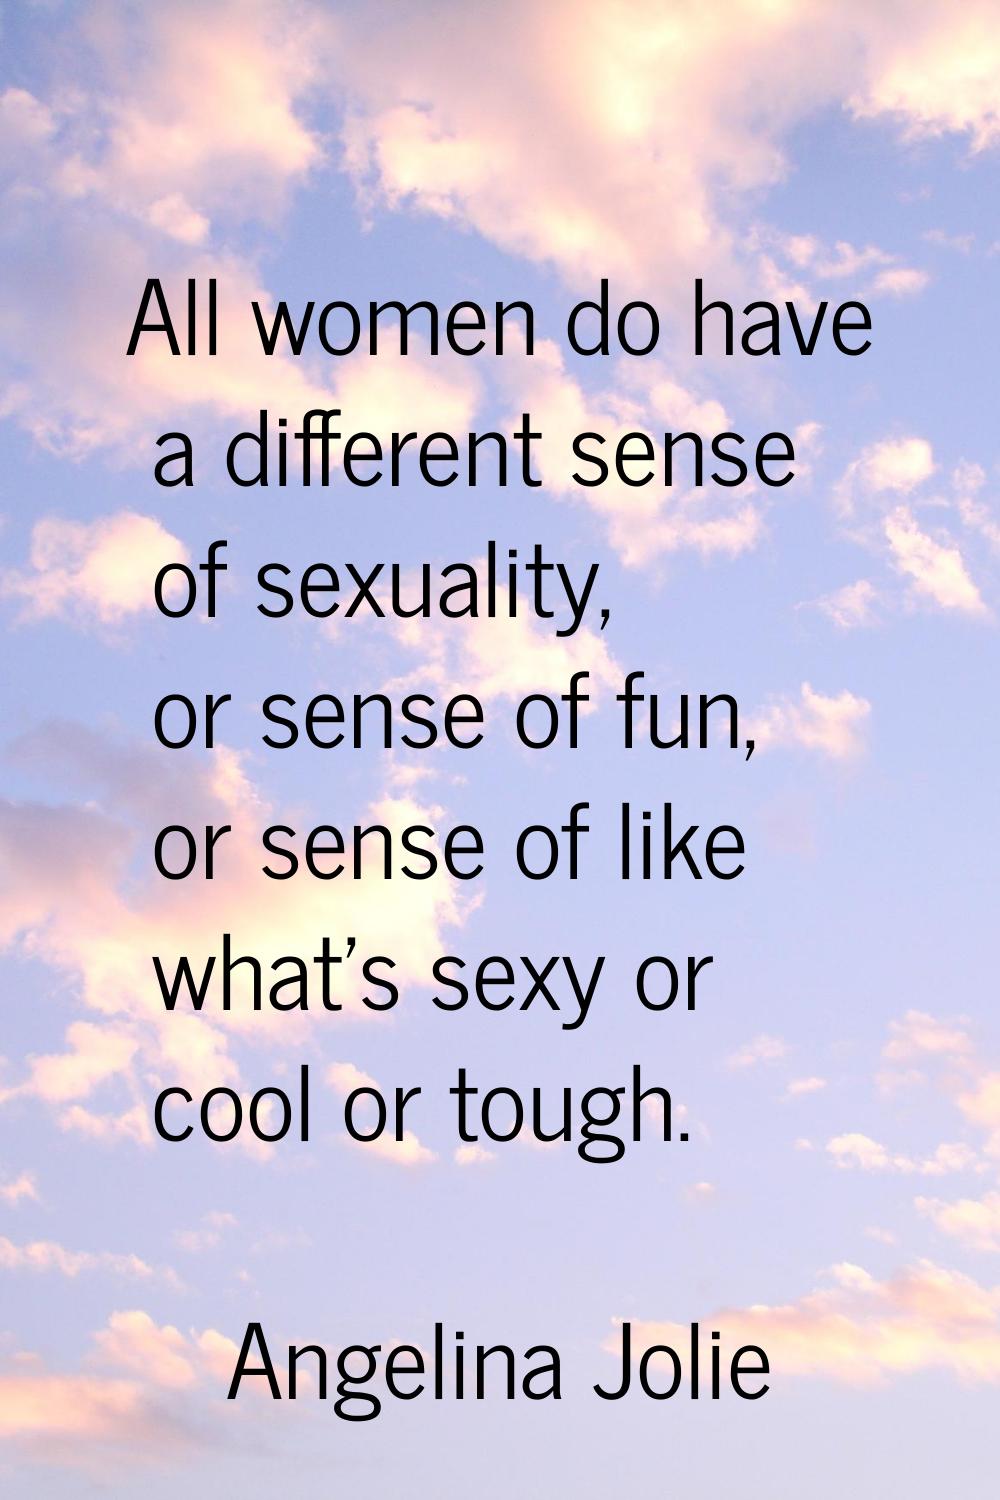 All women do have a different sense of sexuality, or sense of fun, or sense of like what's sexy or 